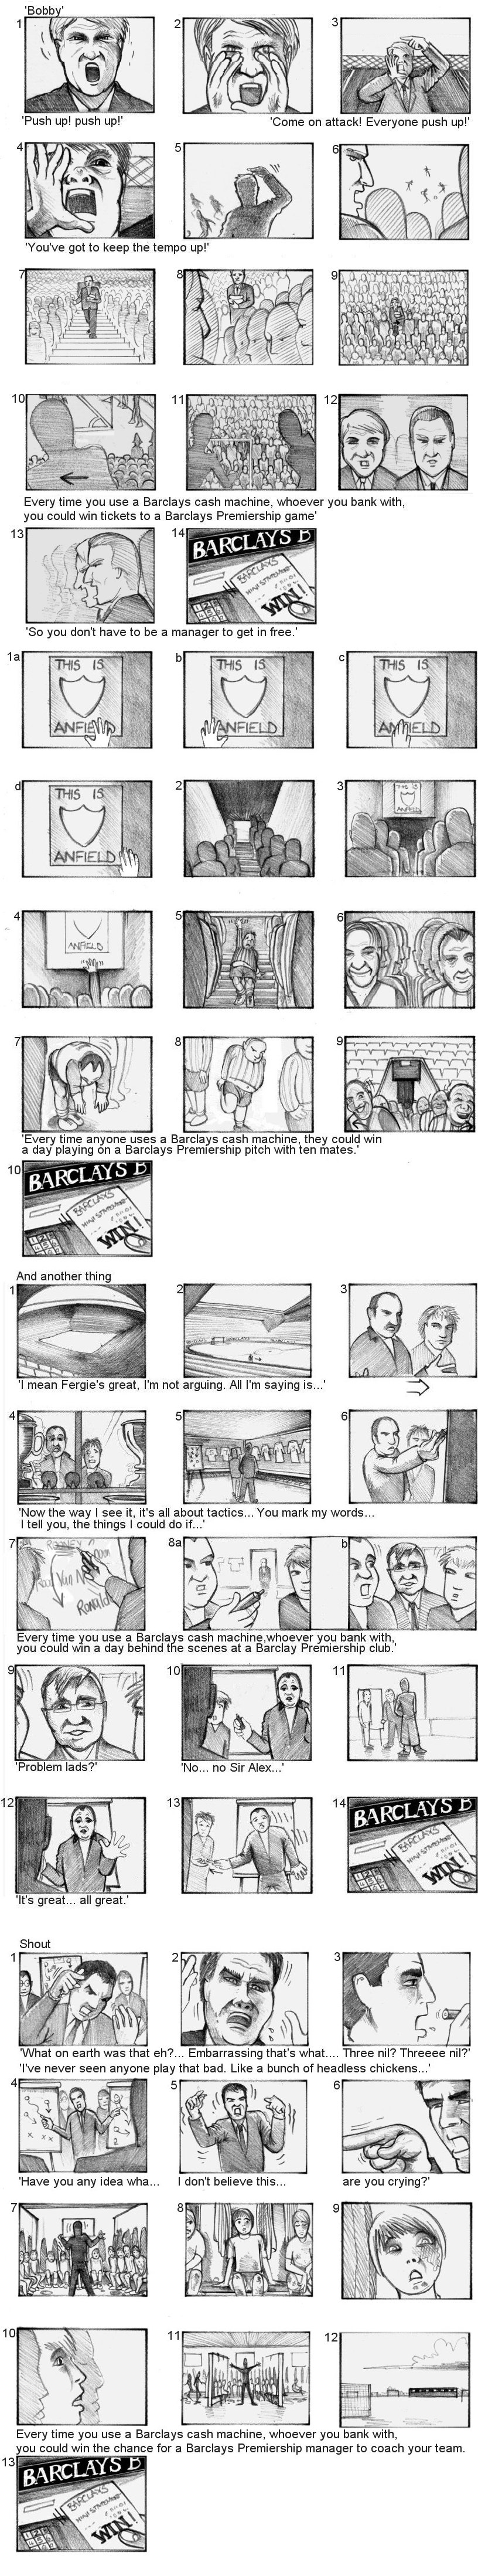 BARCLAYS PREMIERSHIP STORYBOARDS BY ANDY SPARROW